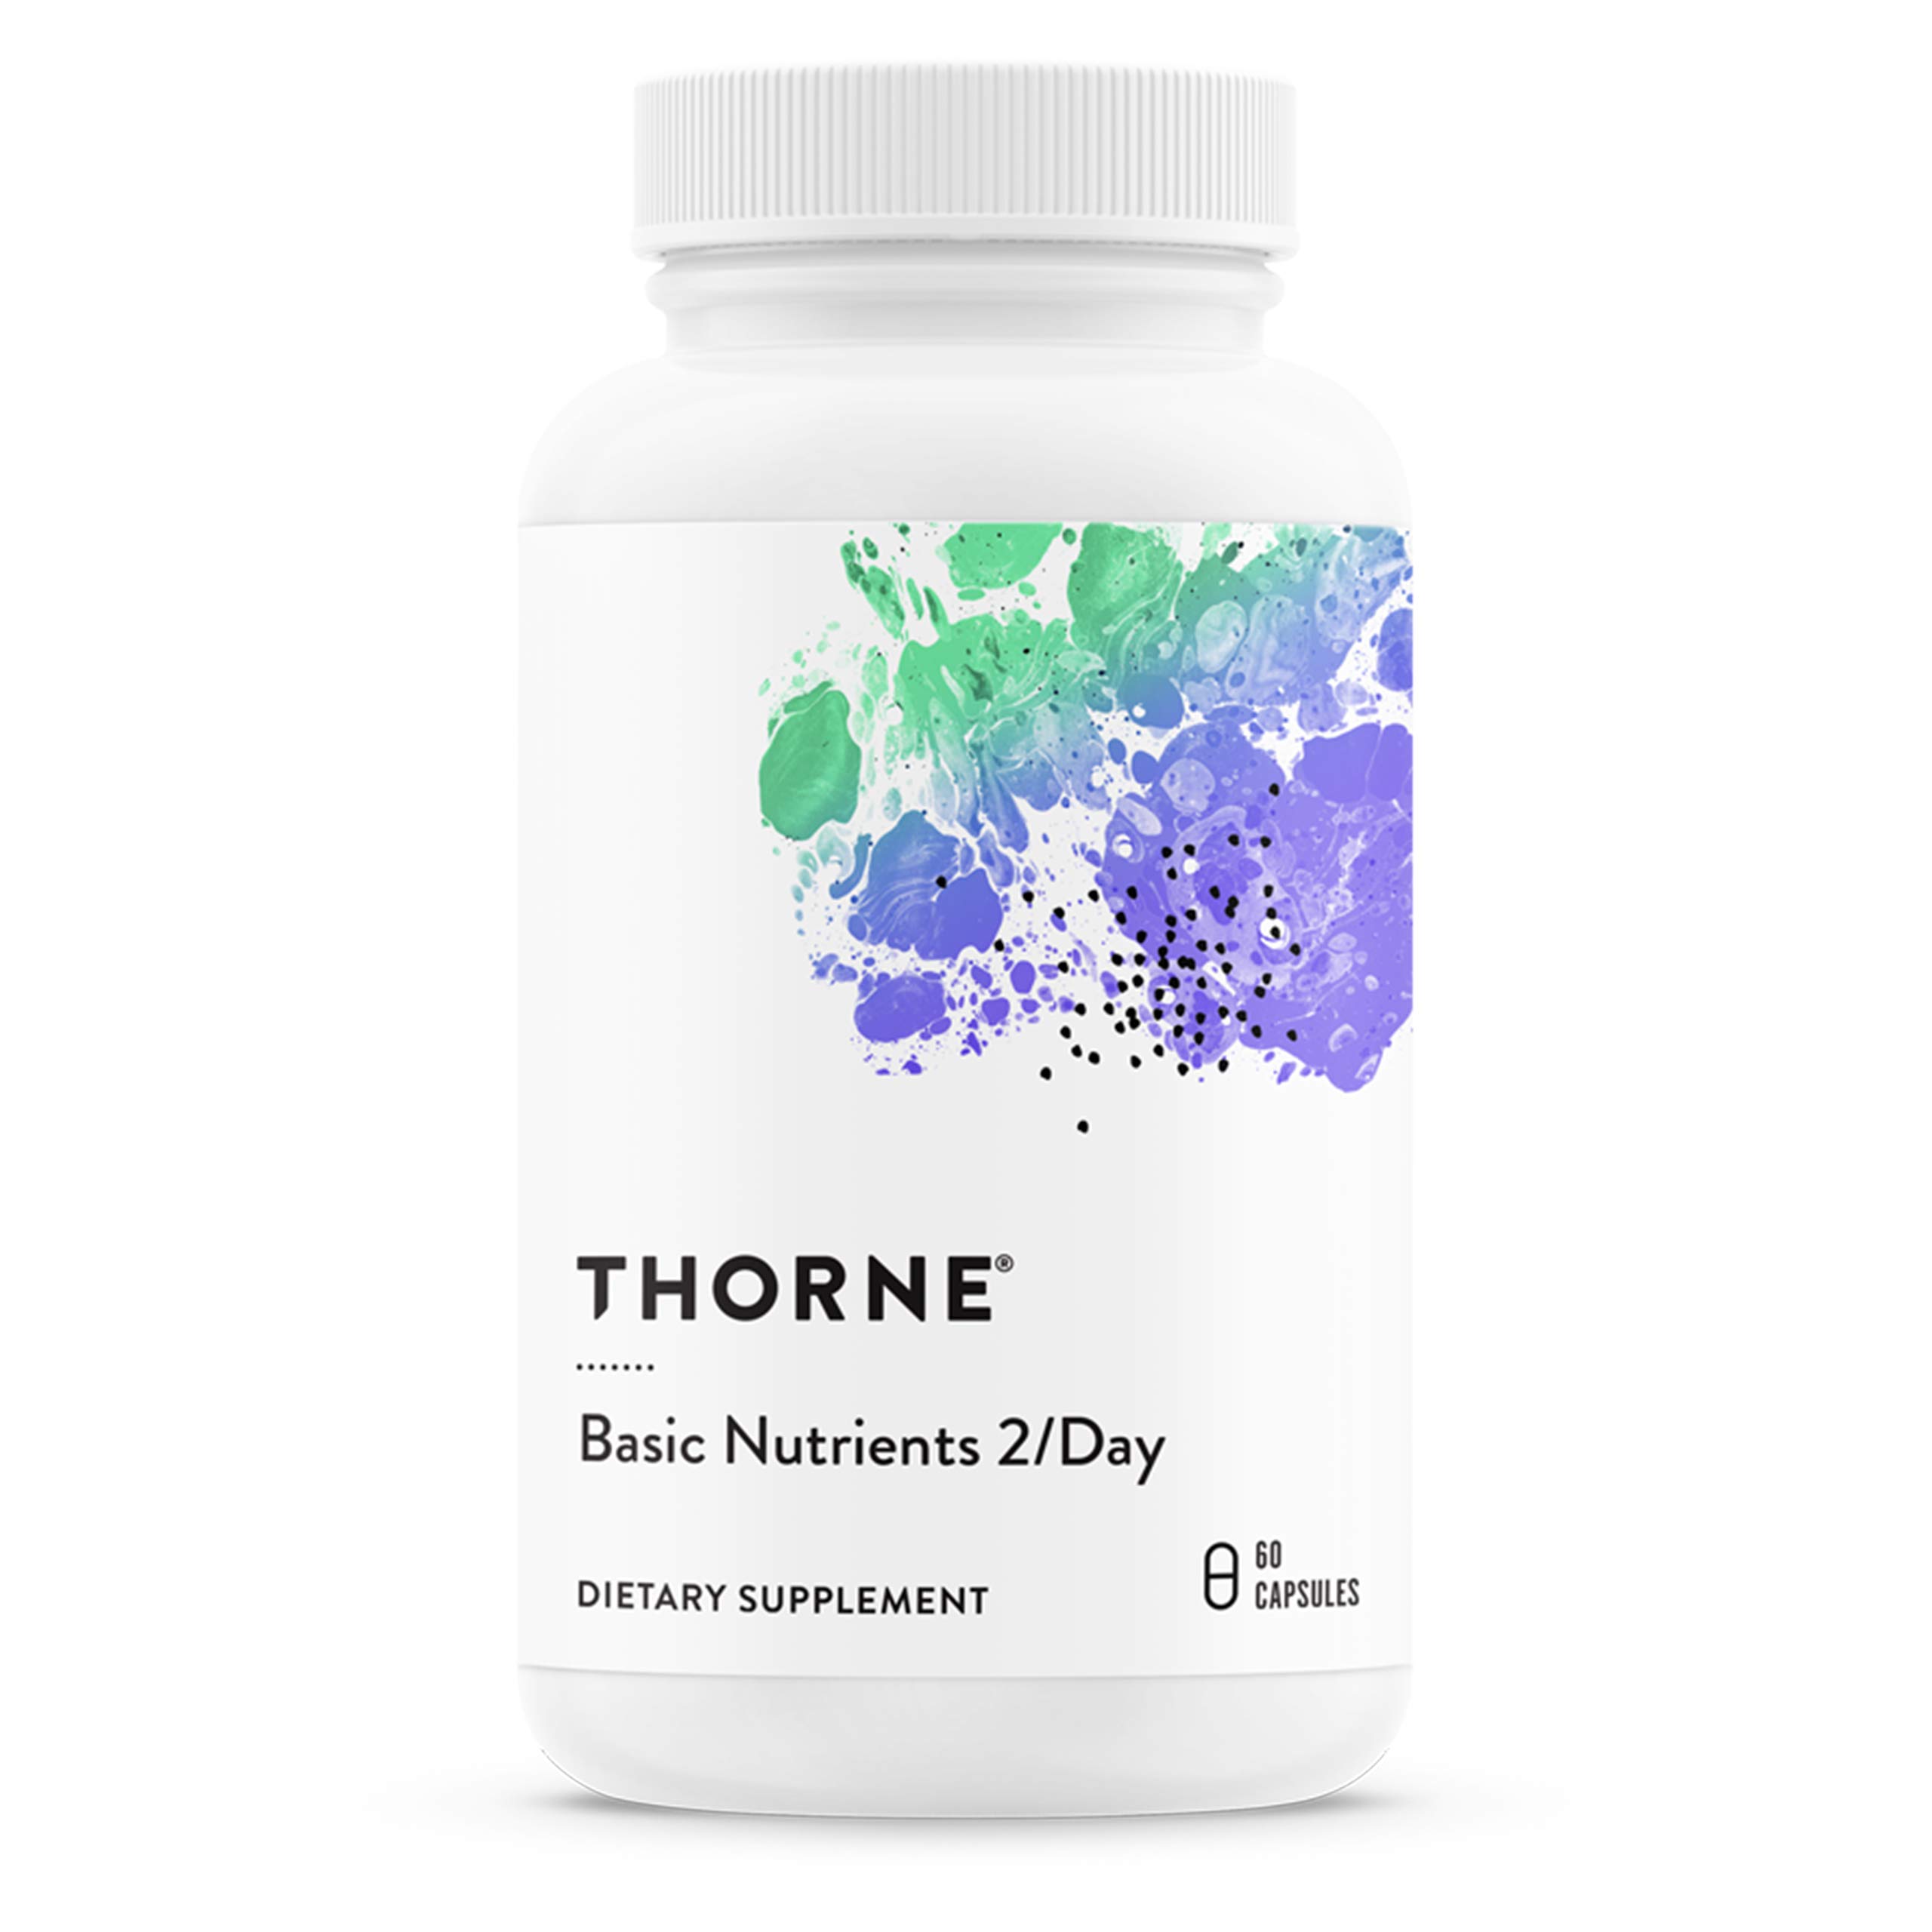 Book Cover Thorne Basic Nutrients 2/Day - Comprehensive Daily Multivitamin with Optimal Bioavailability - Vitamin and Mineral Formula - Gluten-Free, Dairy-Free, Soy-Free - 60 Capsules - 30 Servings